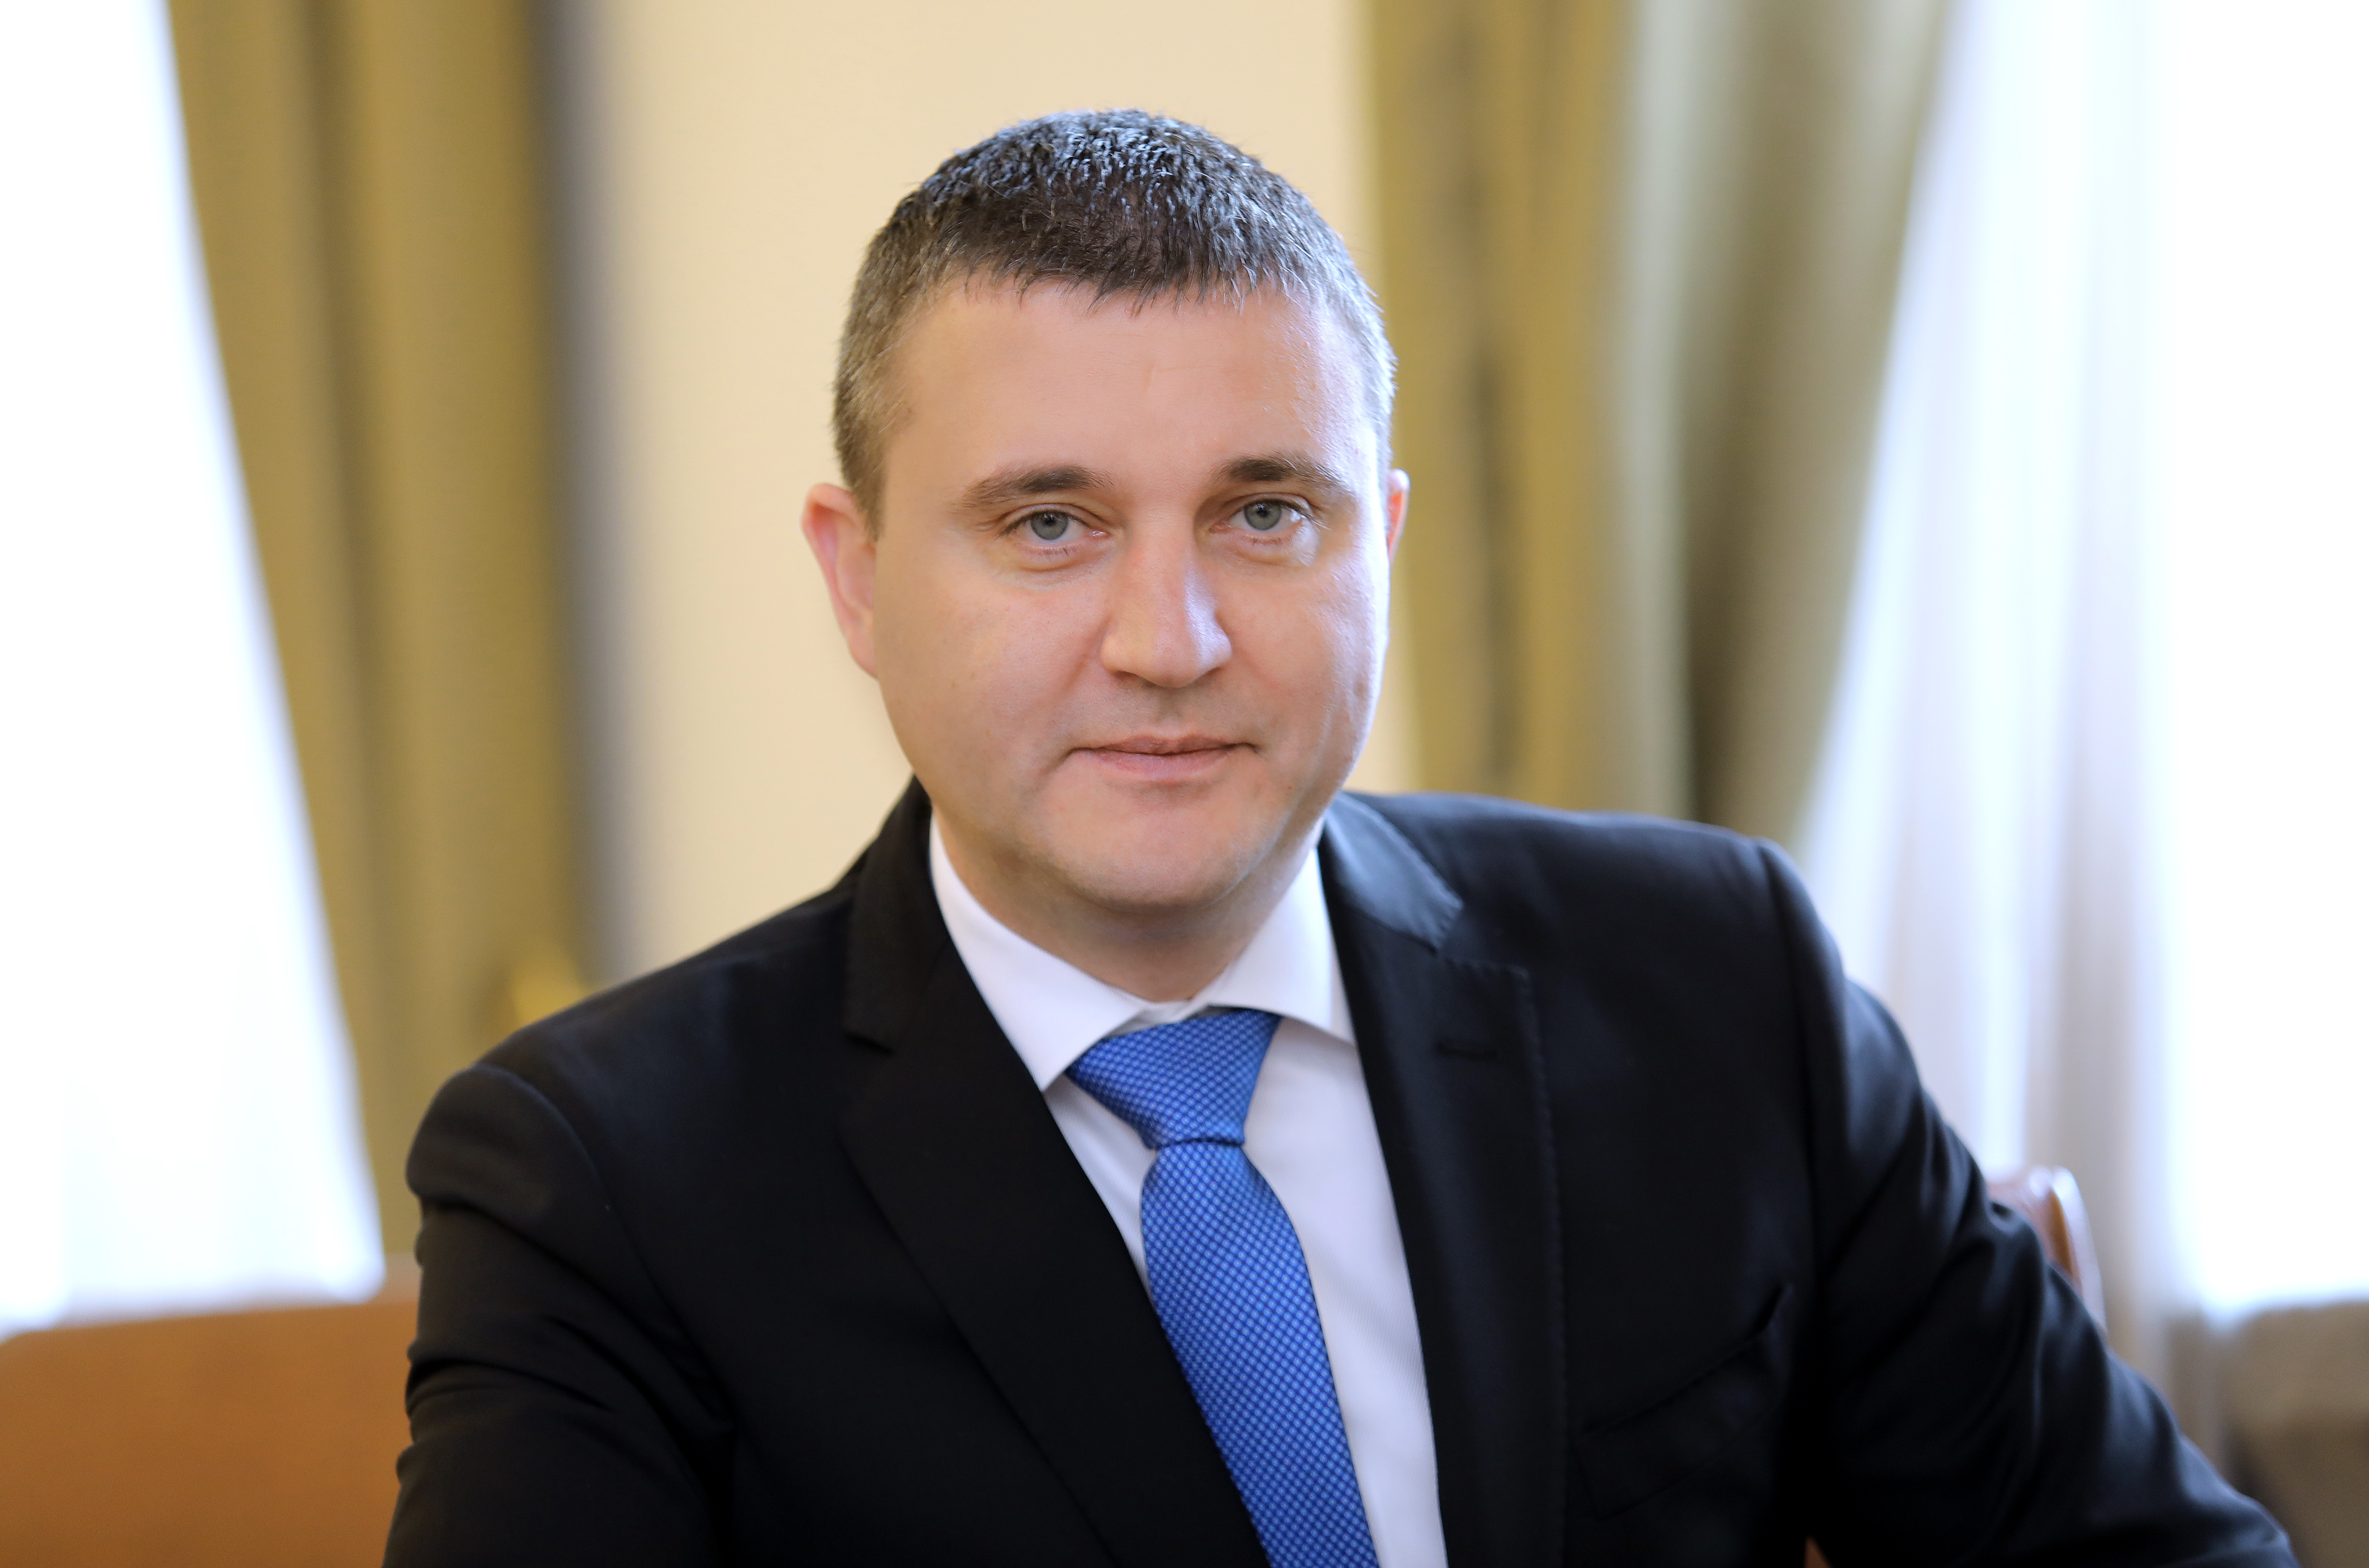 VLADISLAV GORANOV: TODAY, BULGARIA WILL SUBMIT A REQUEST TO ENTER INTO A CLOSE COOPERATION WITH THE ECB ON BANKING SUPERVISION